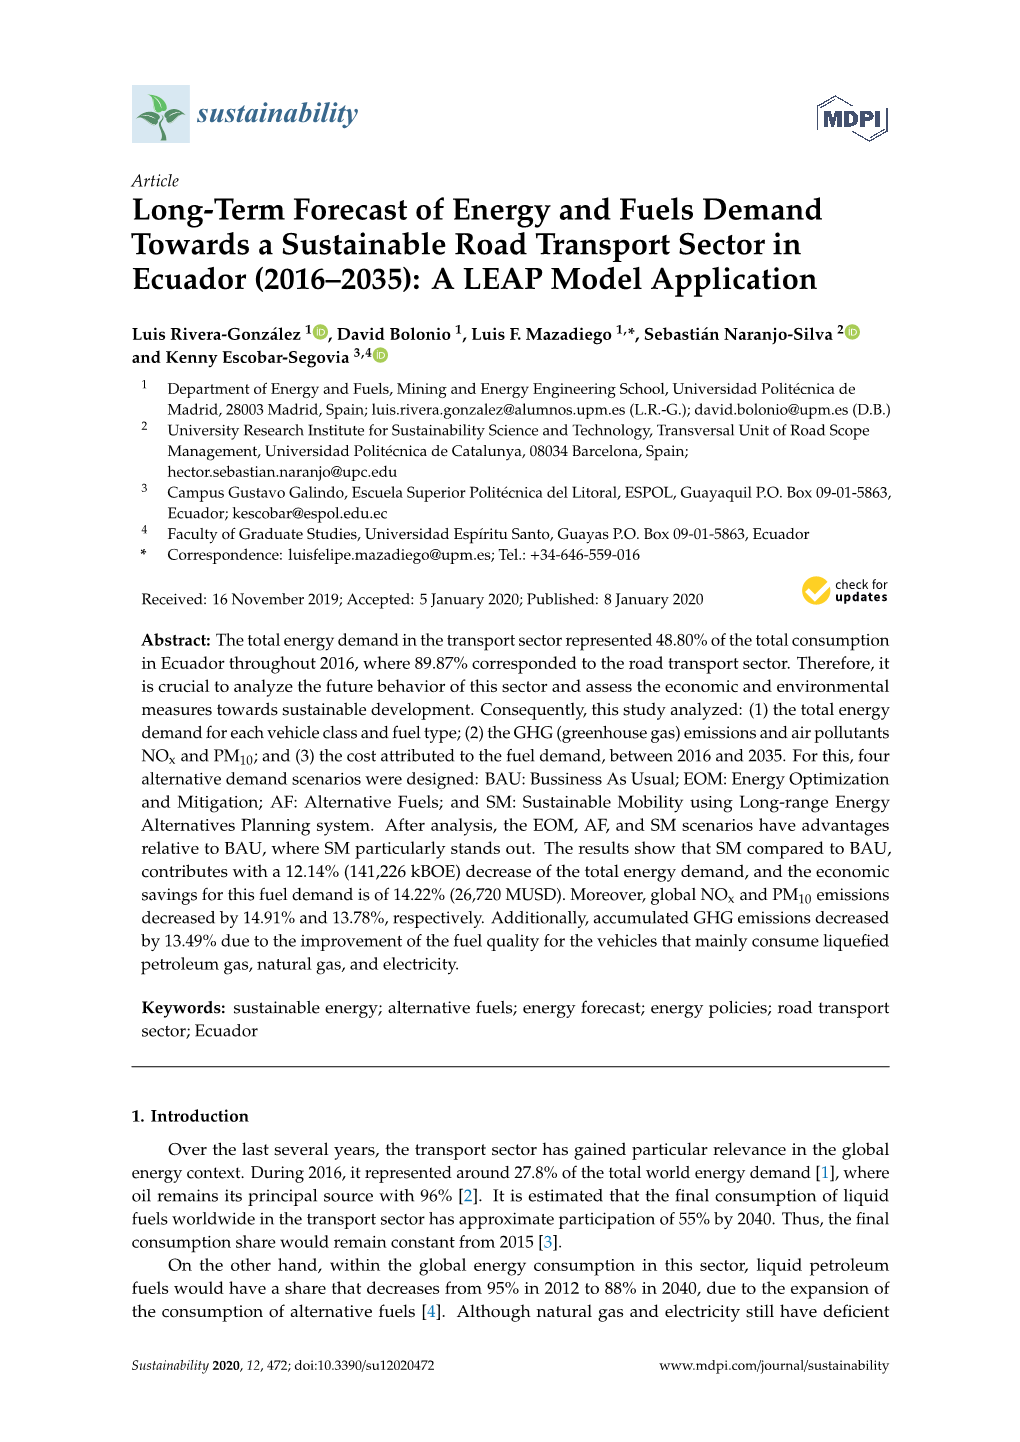 Long-Term Forecast of Energy and Fuels Demand Towards a Sustainable Road Transport Sector in Ecuador (2016–2035): a LEAP Model Application